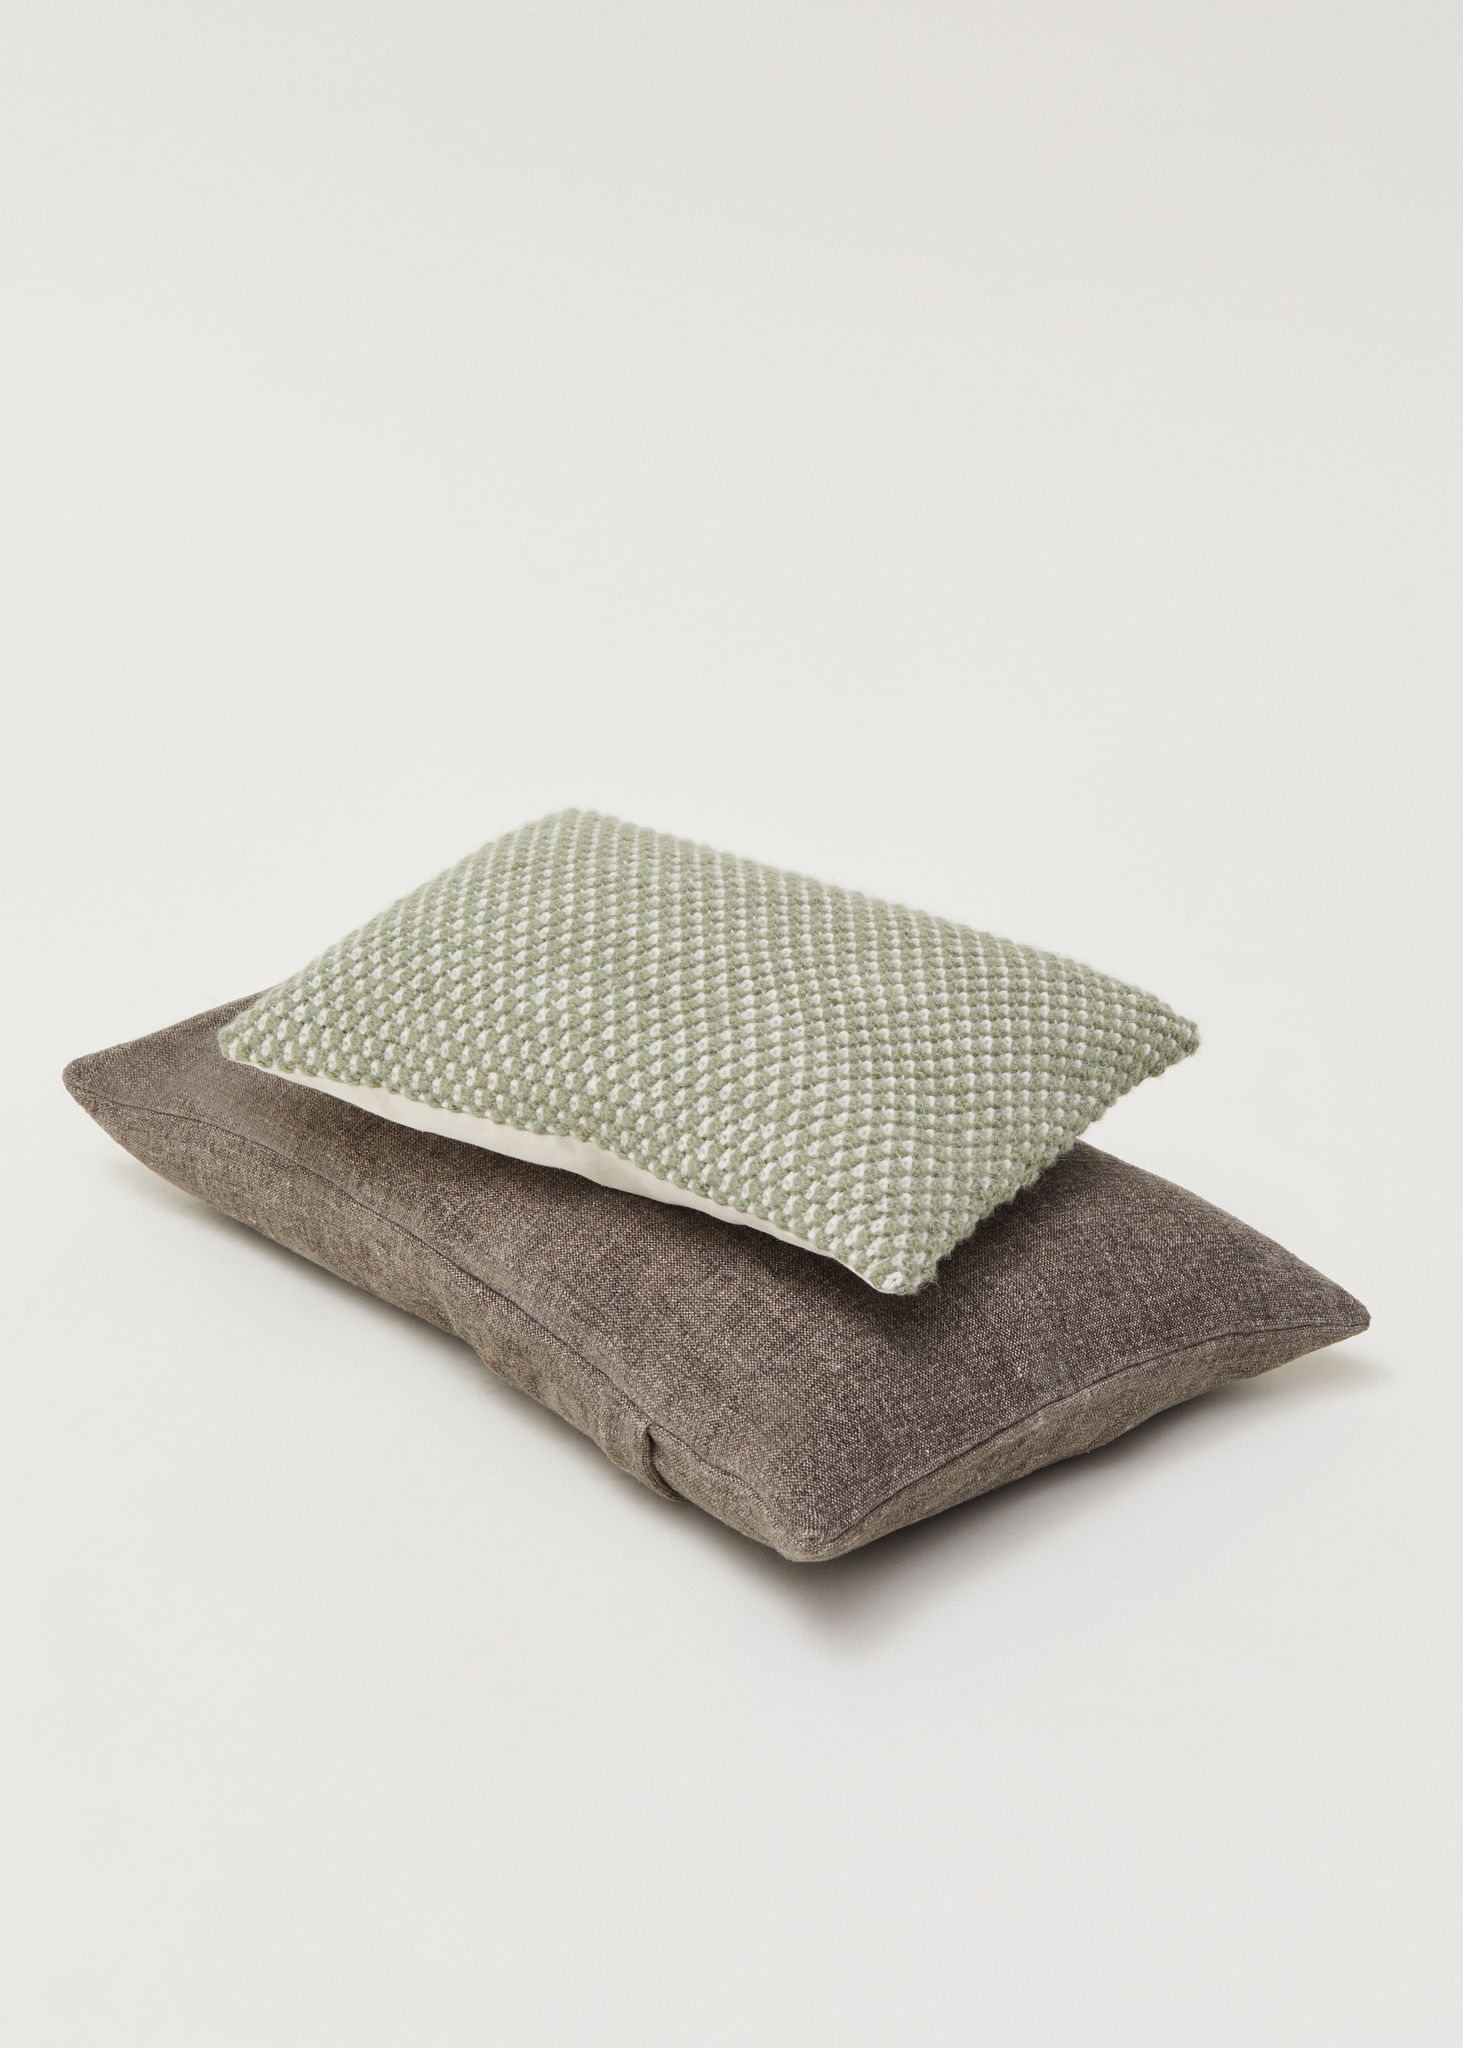 Heather Classic Cushion (30x40) / Mix Dusty Green/Albicant